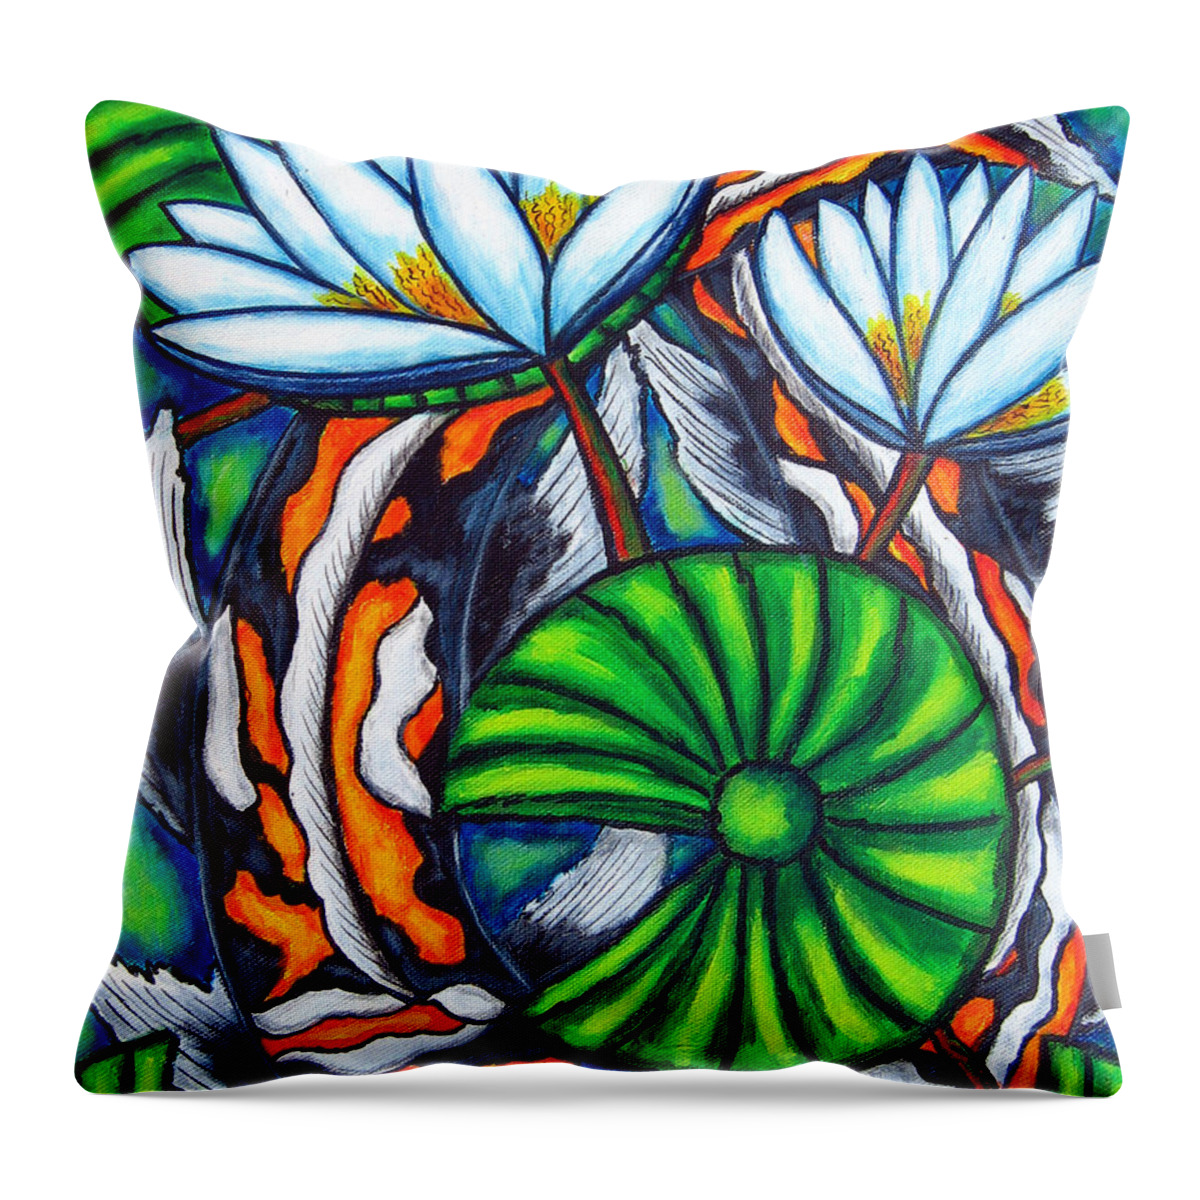 Koi Throw Pillow featuring the painting Coy Carp by Lisa Lorenz